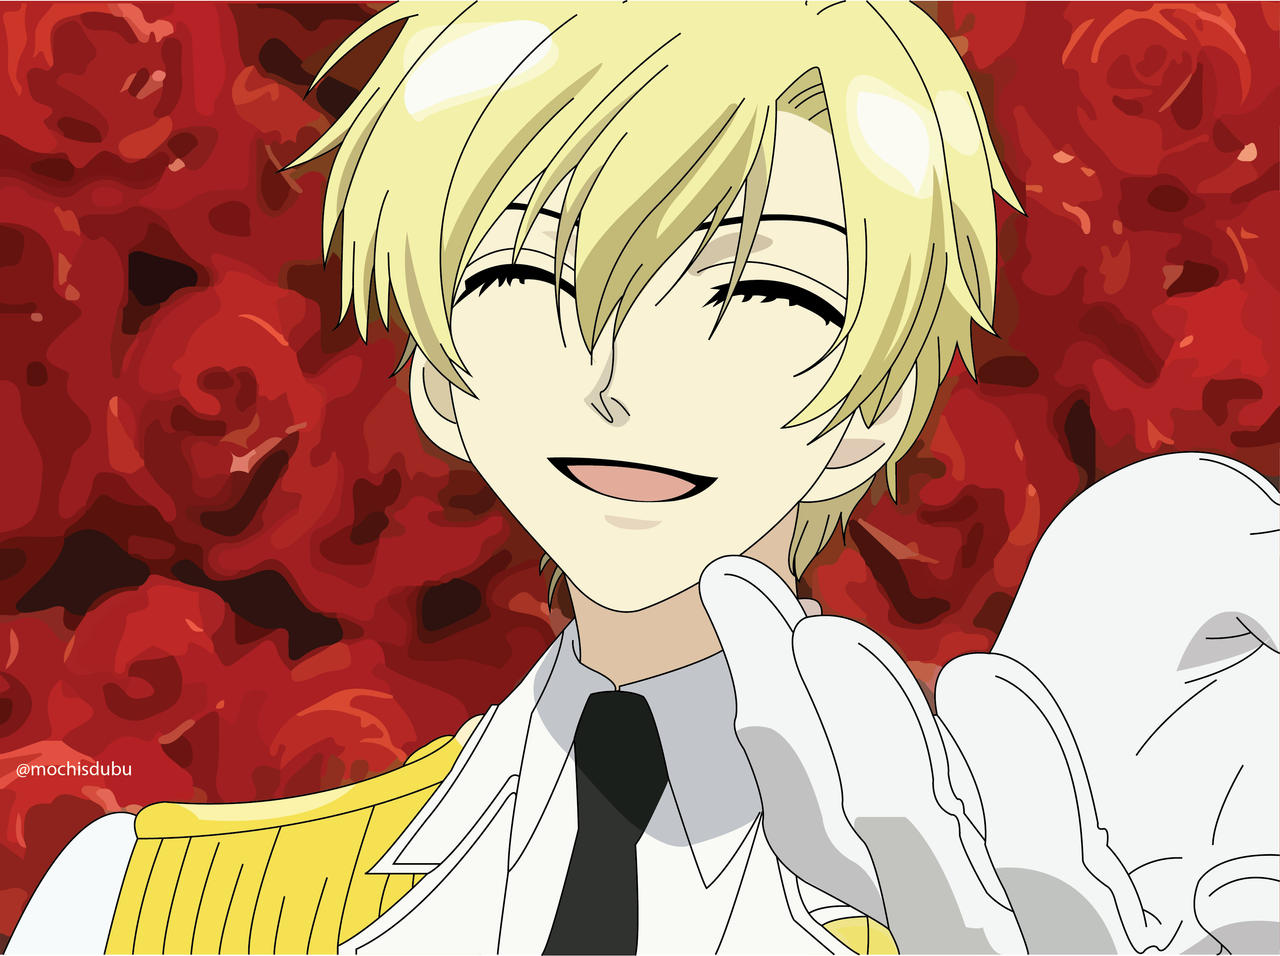 5. "Tamaki Suoh" from Ouran High School Host Club - wide 7